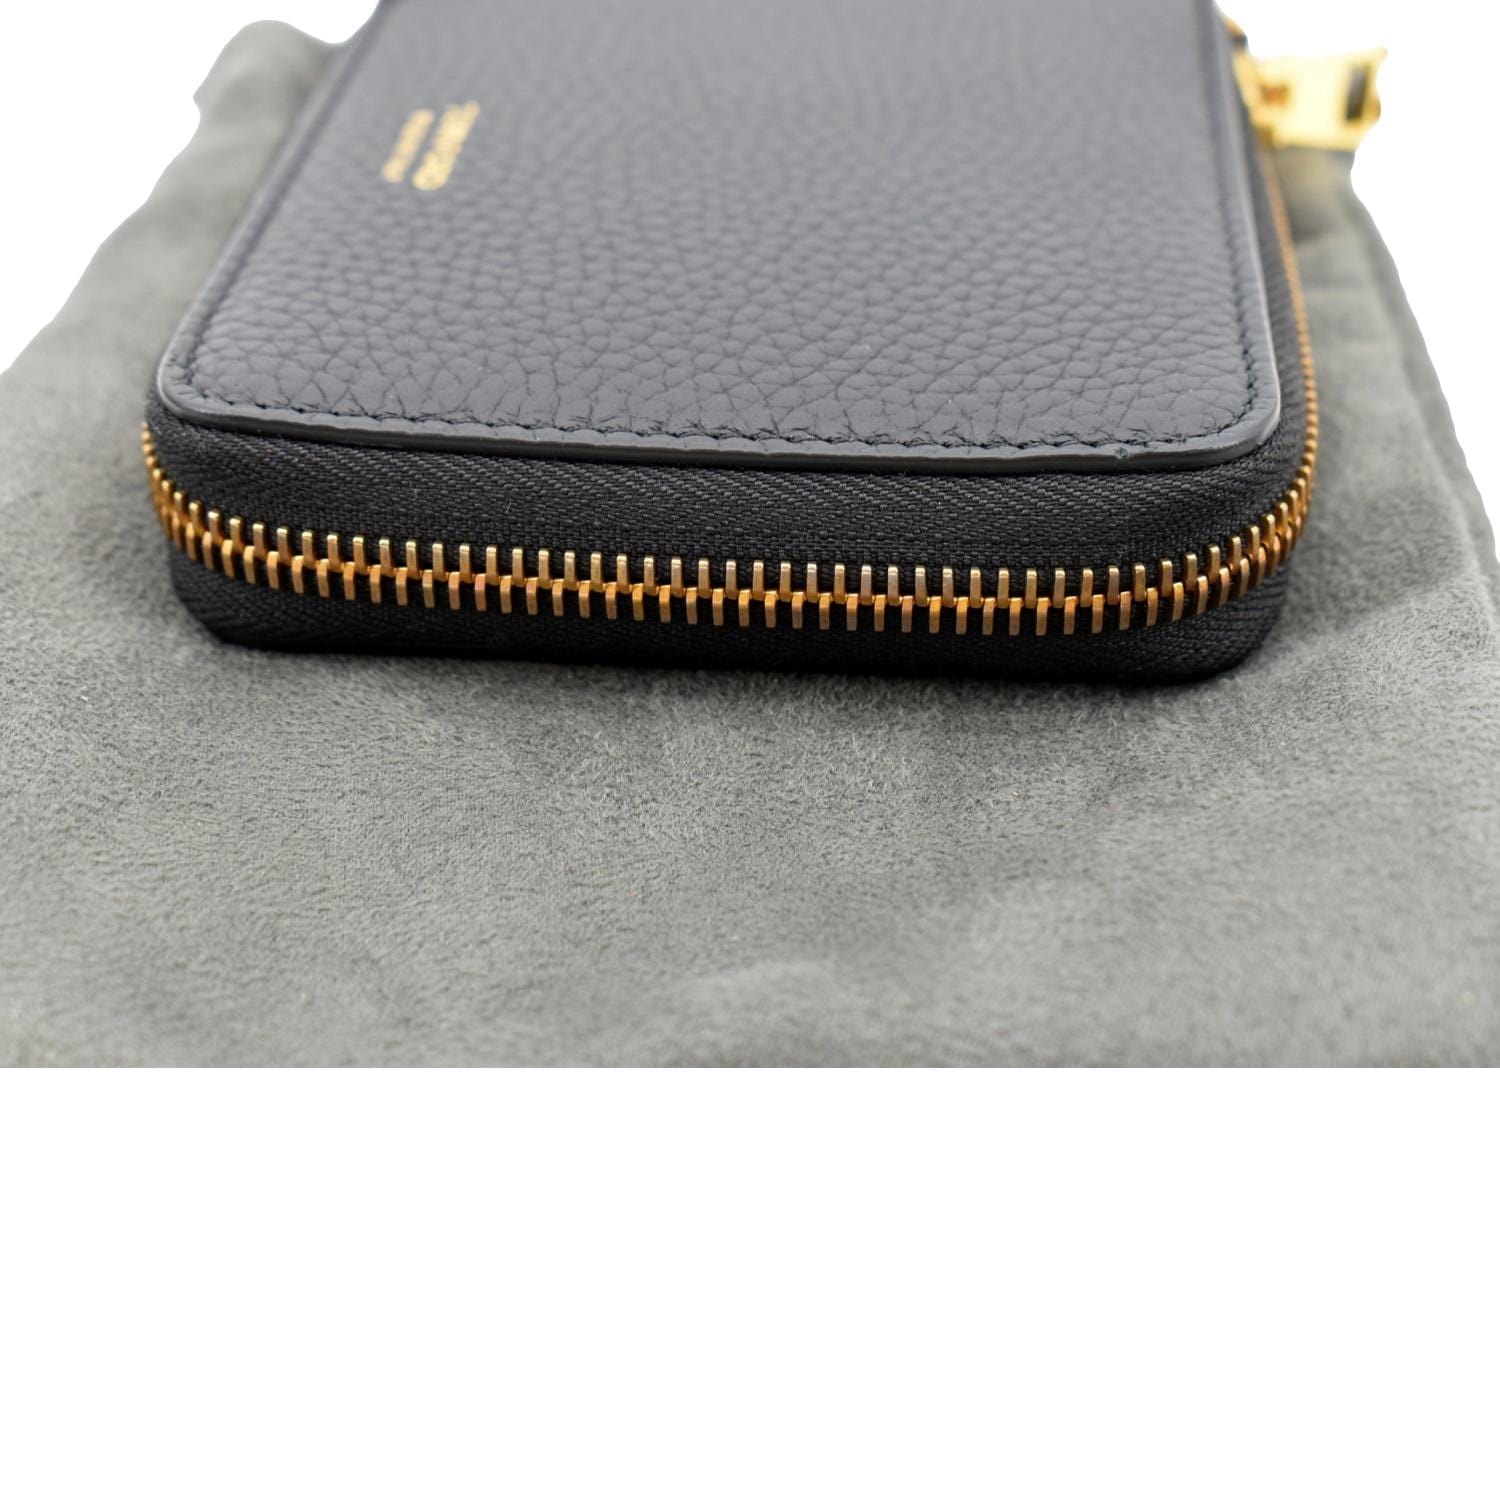 Tom Ford Leather Zip Small Chain Wallet in Black Color